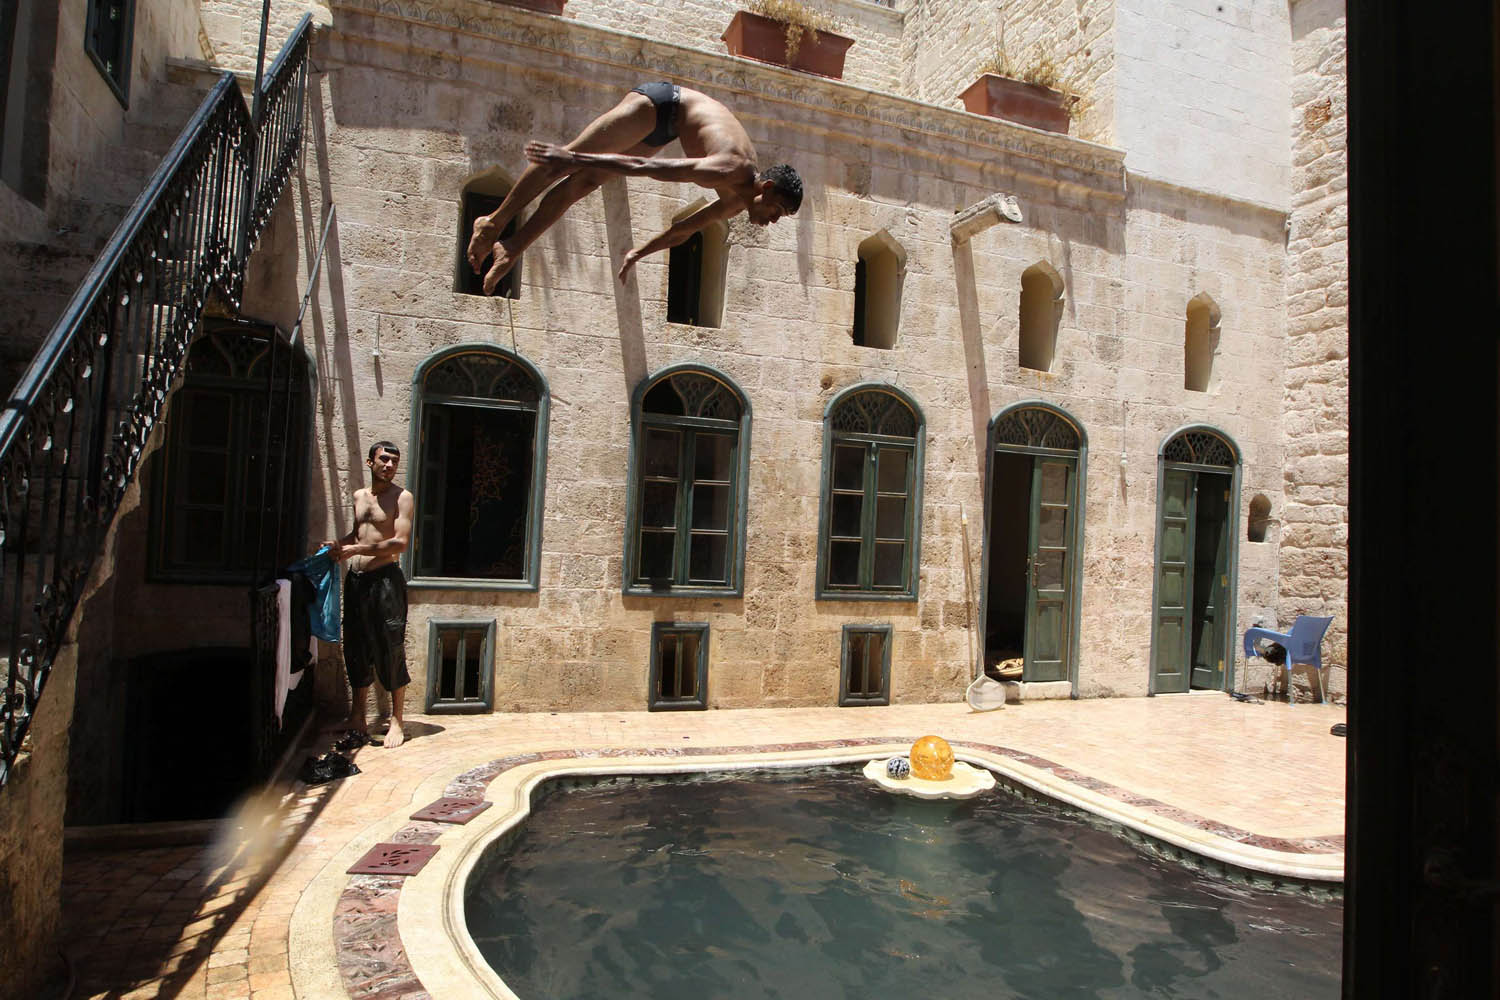 June 24, 2013. A Free Syrian Army fighter dives into a swimming pool inside a house in the old city of Aleppo.